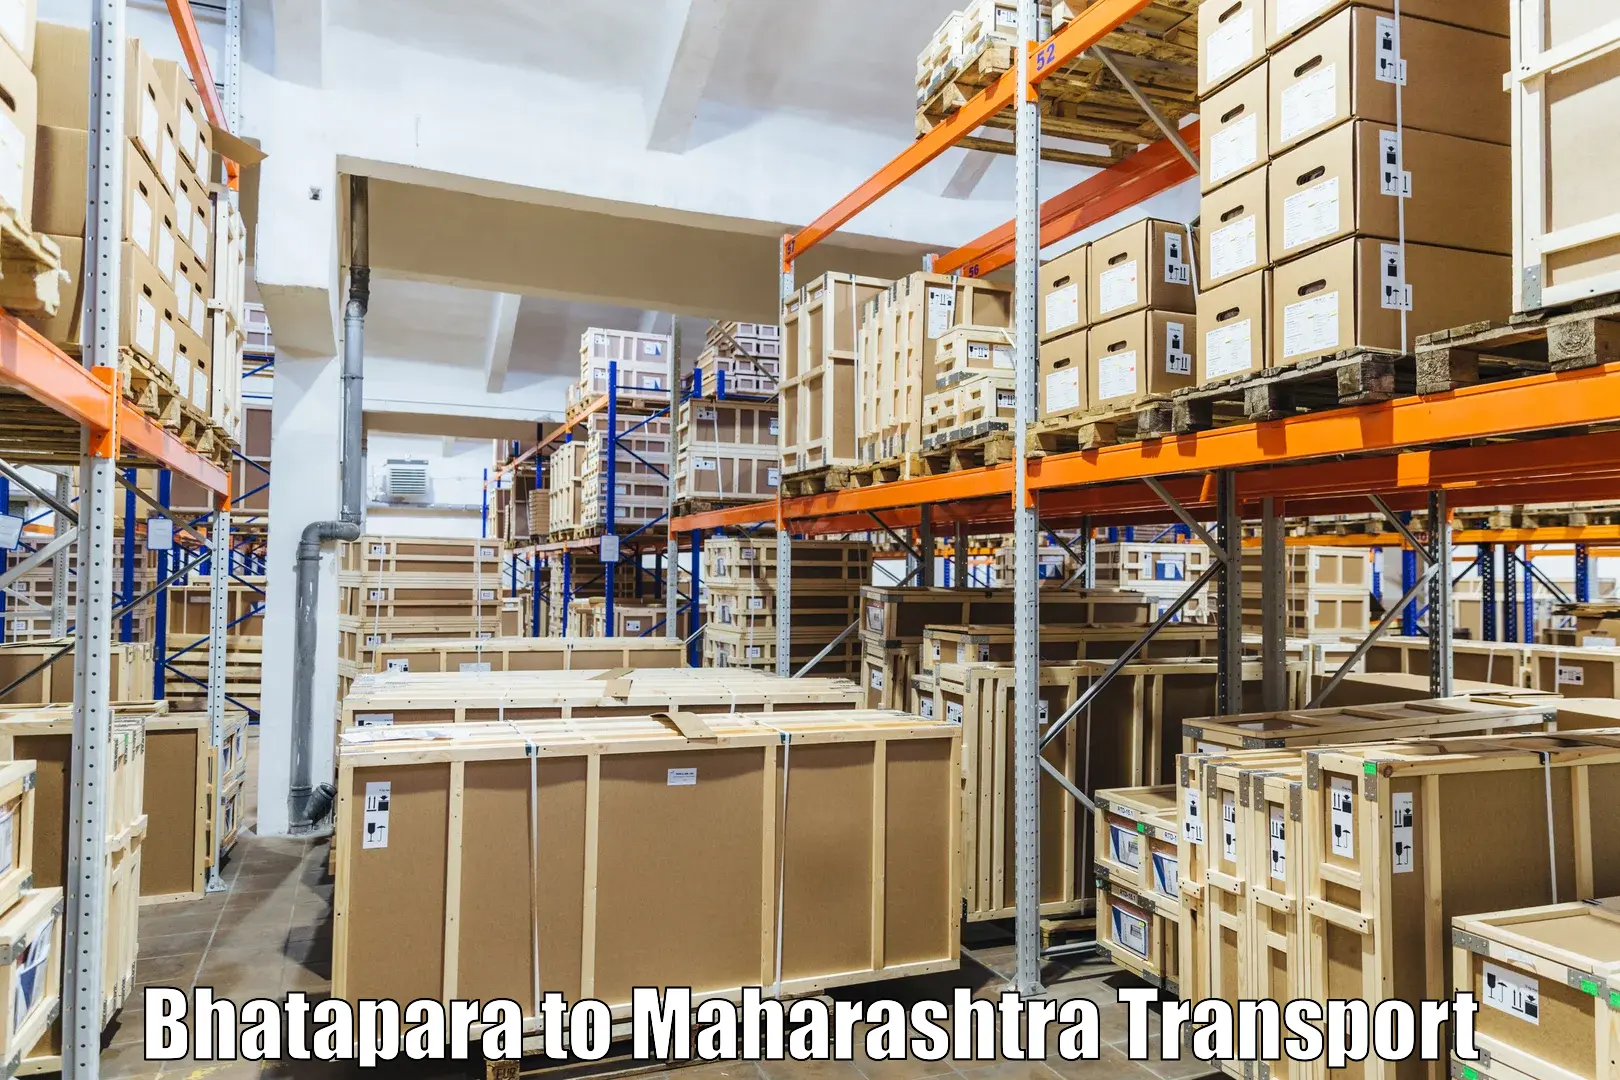 Truck transport companies in India Bhatapara to DY Patil Vidyapeeth Pune